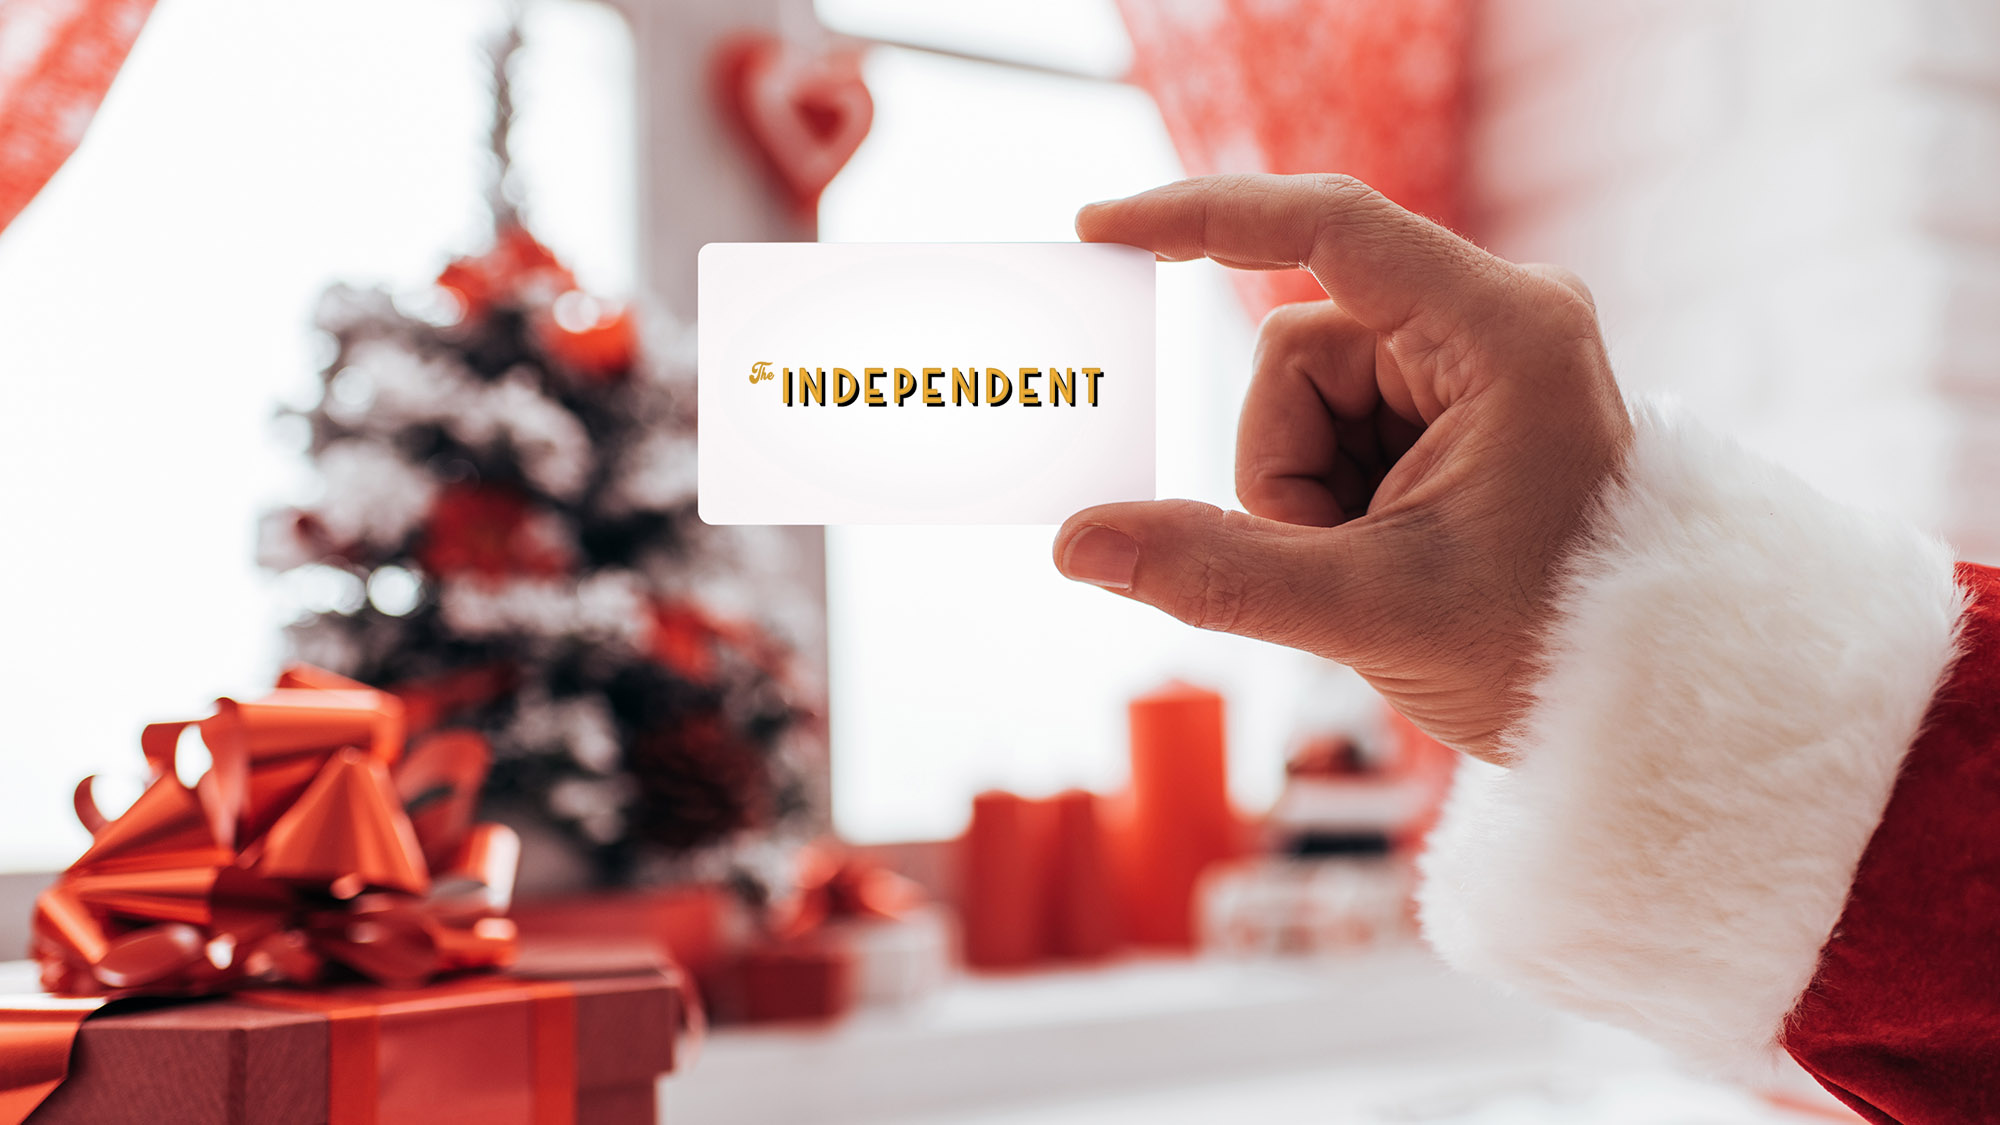 Santa holding The Independent's gift card with a Christmas tree and presents in the background